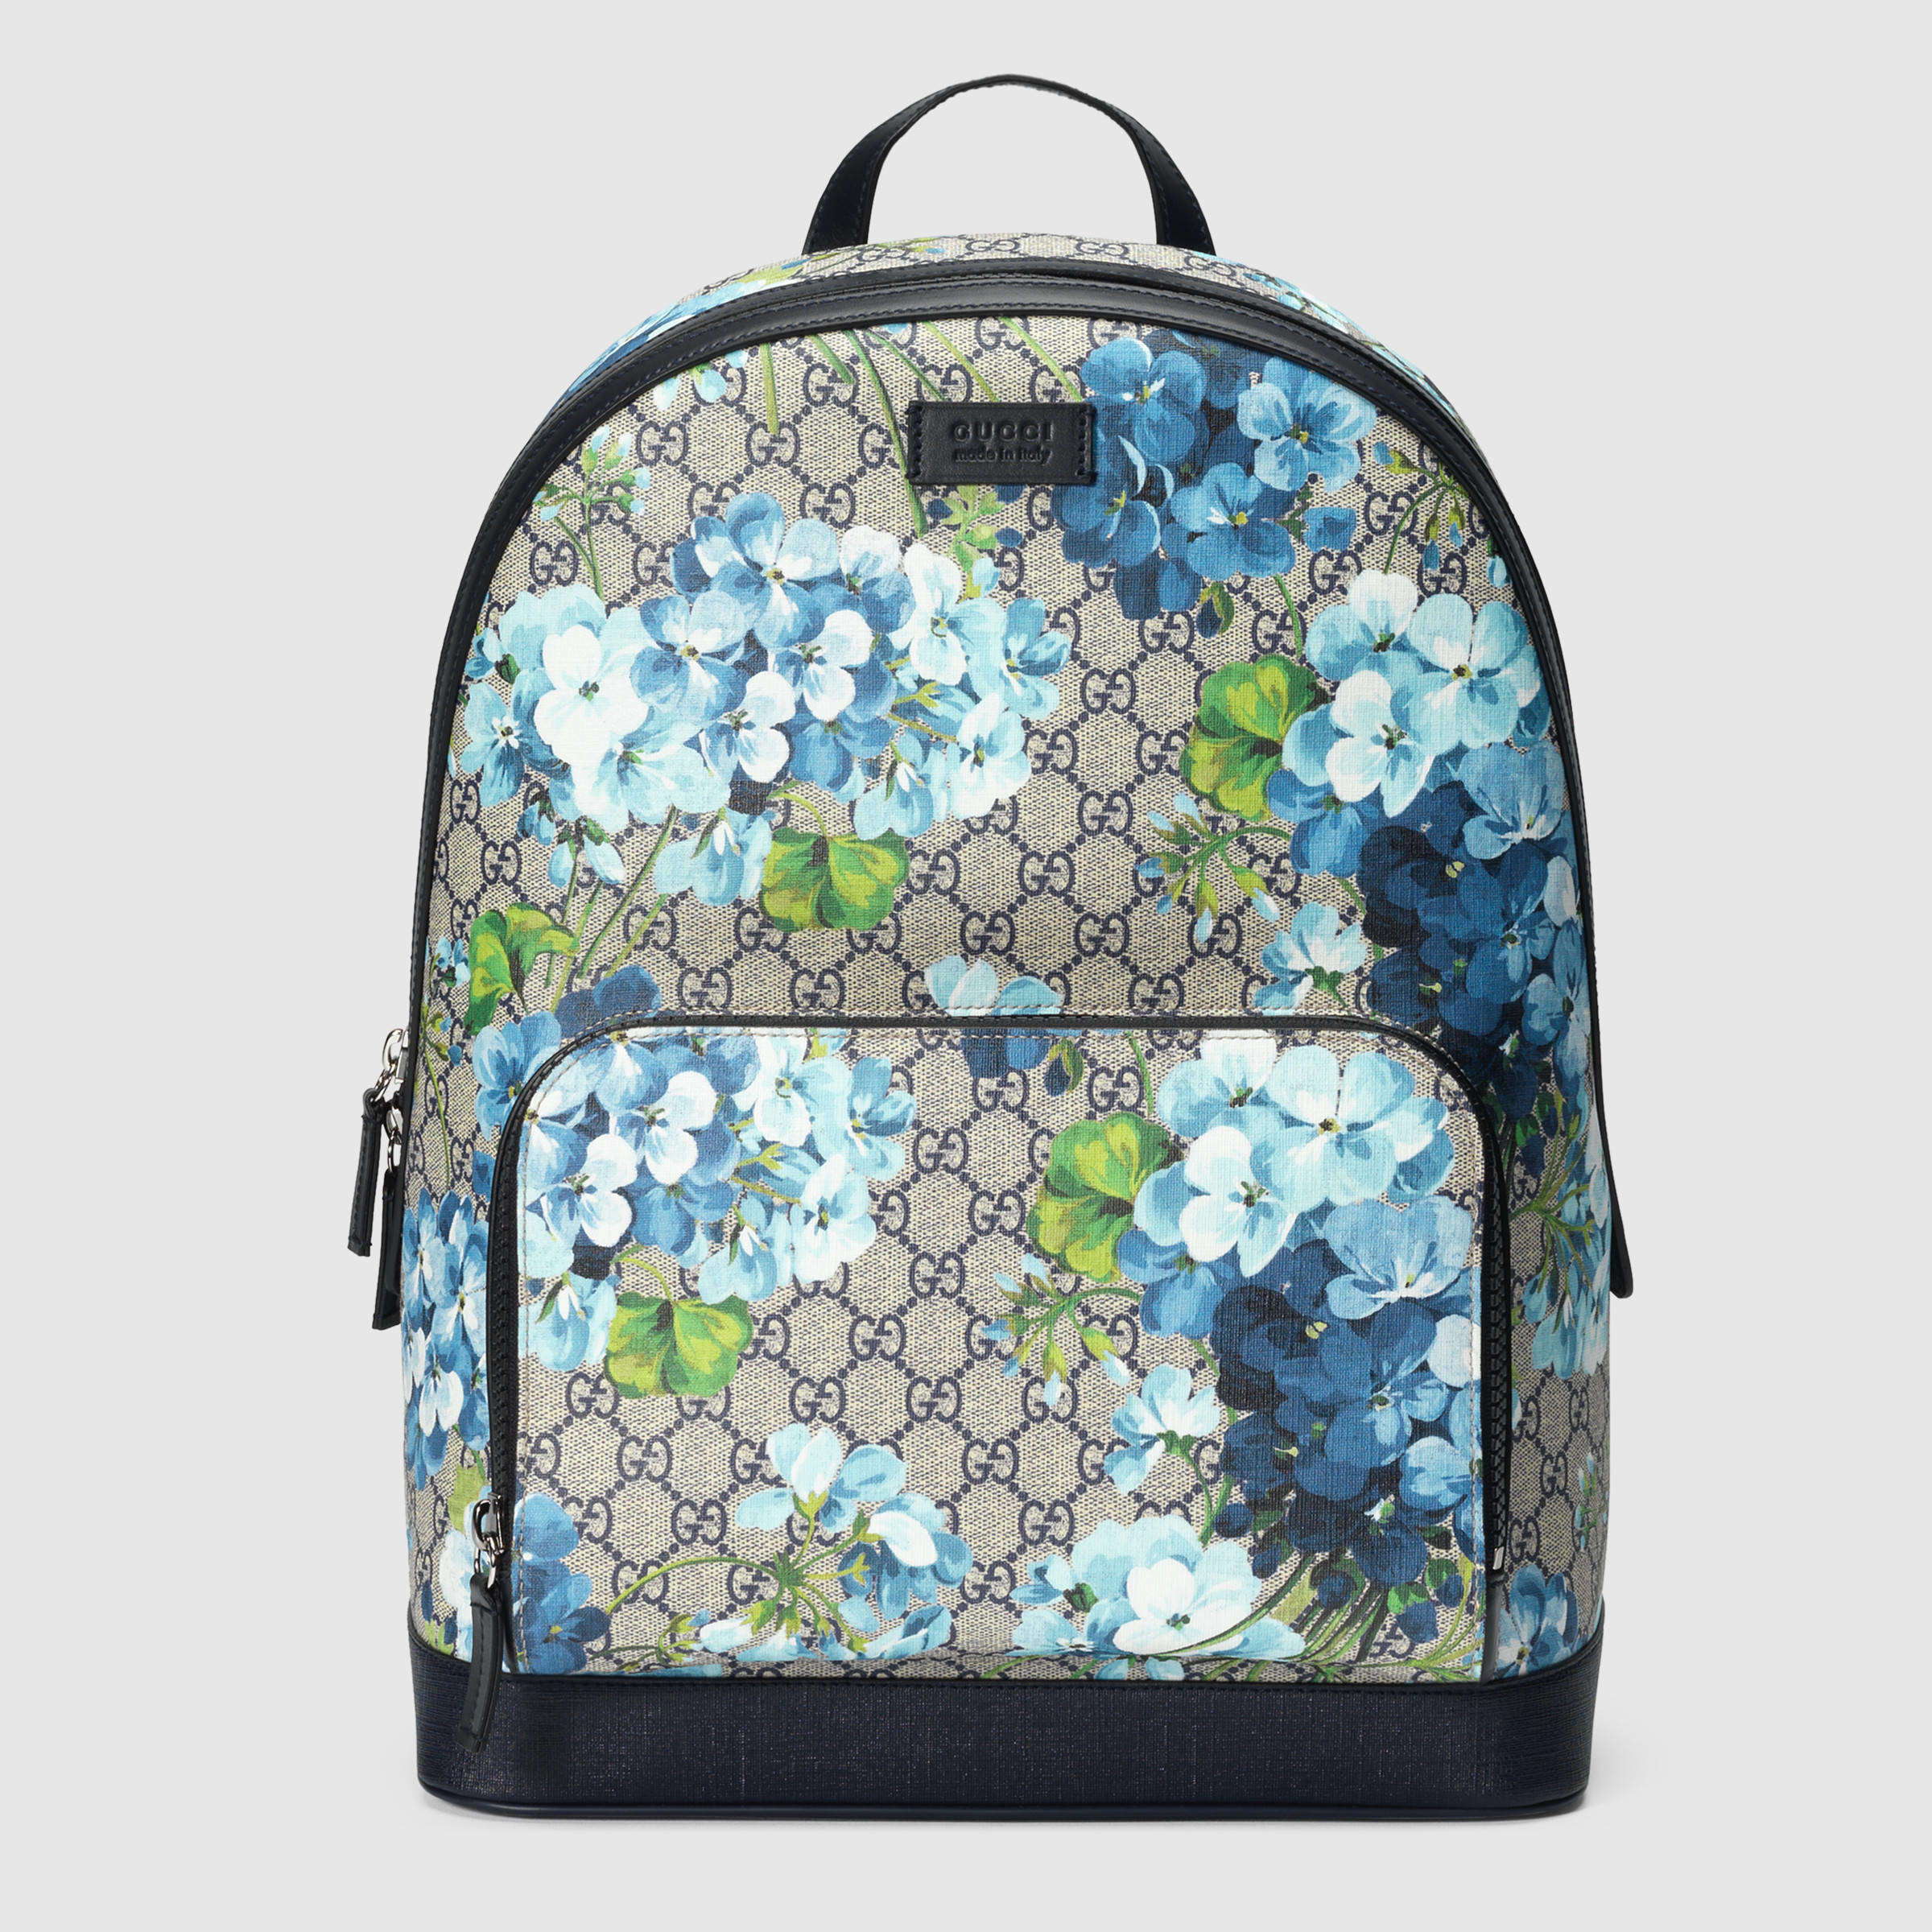 Gucci Canvas Xl Gg Floral Print Backpack for Men - Lyst